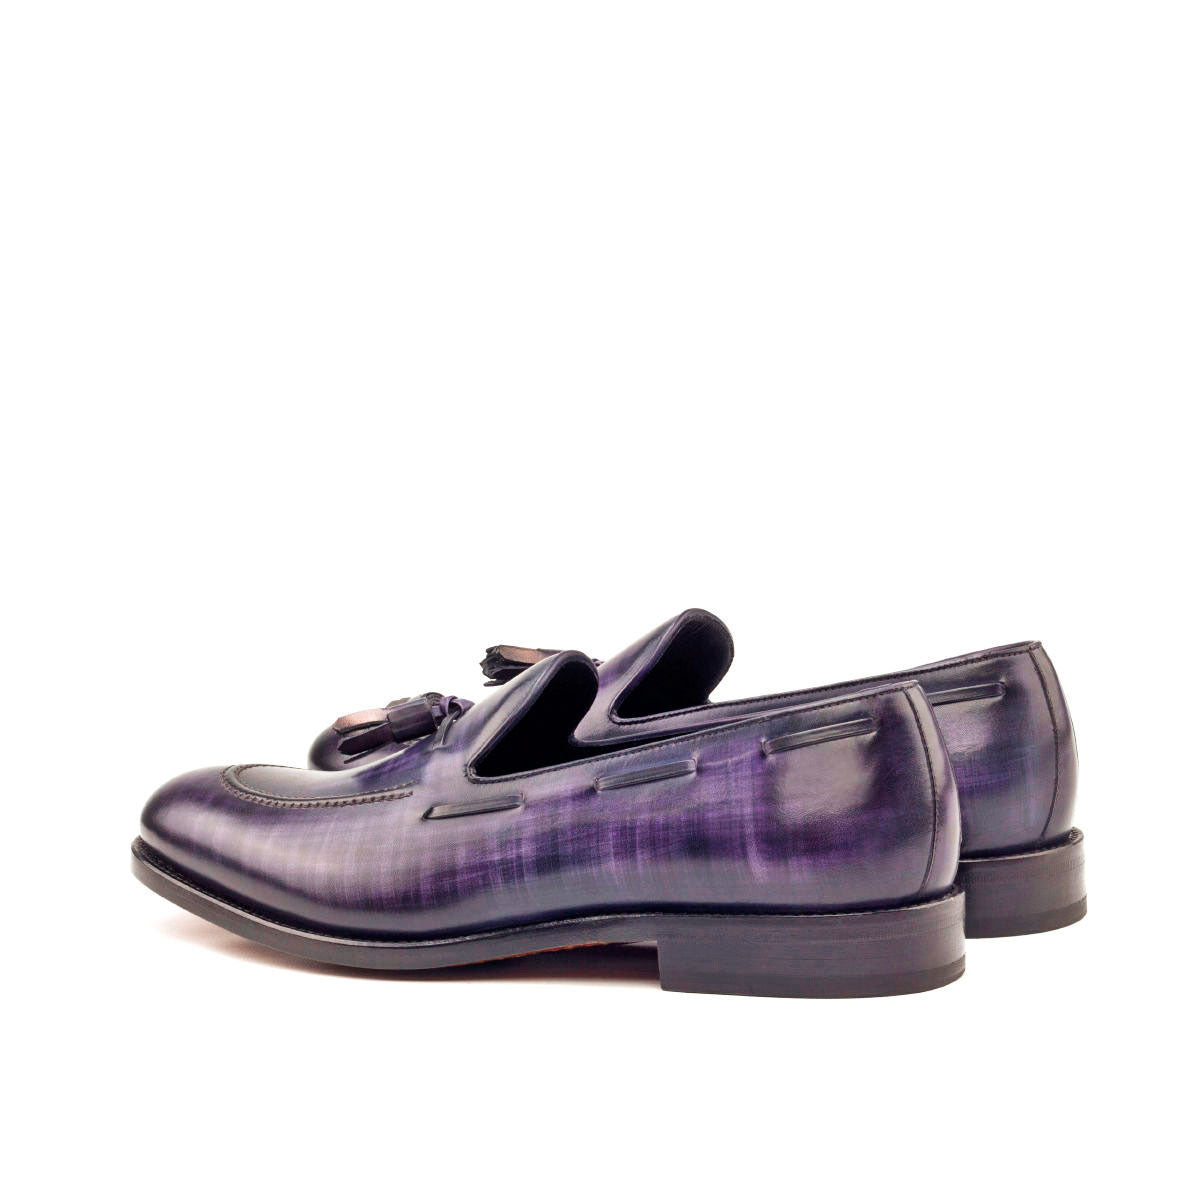 Mulberry Patina Tassle Loafer